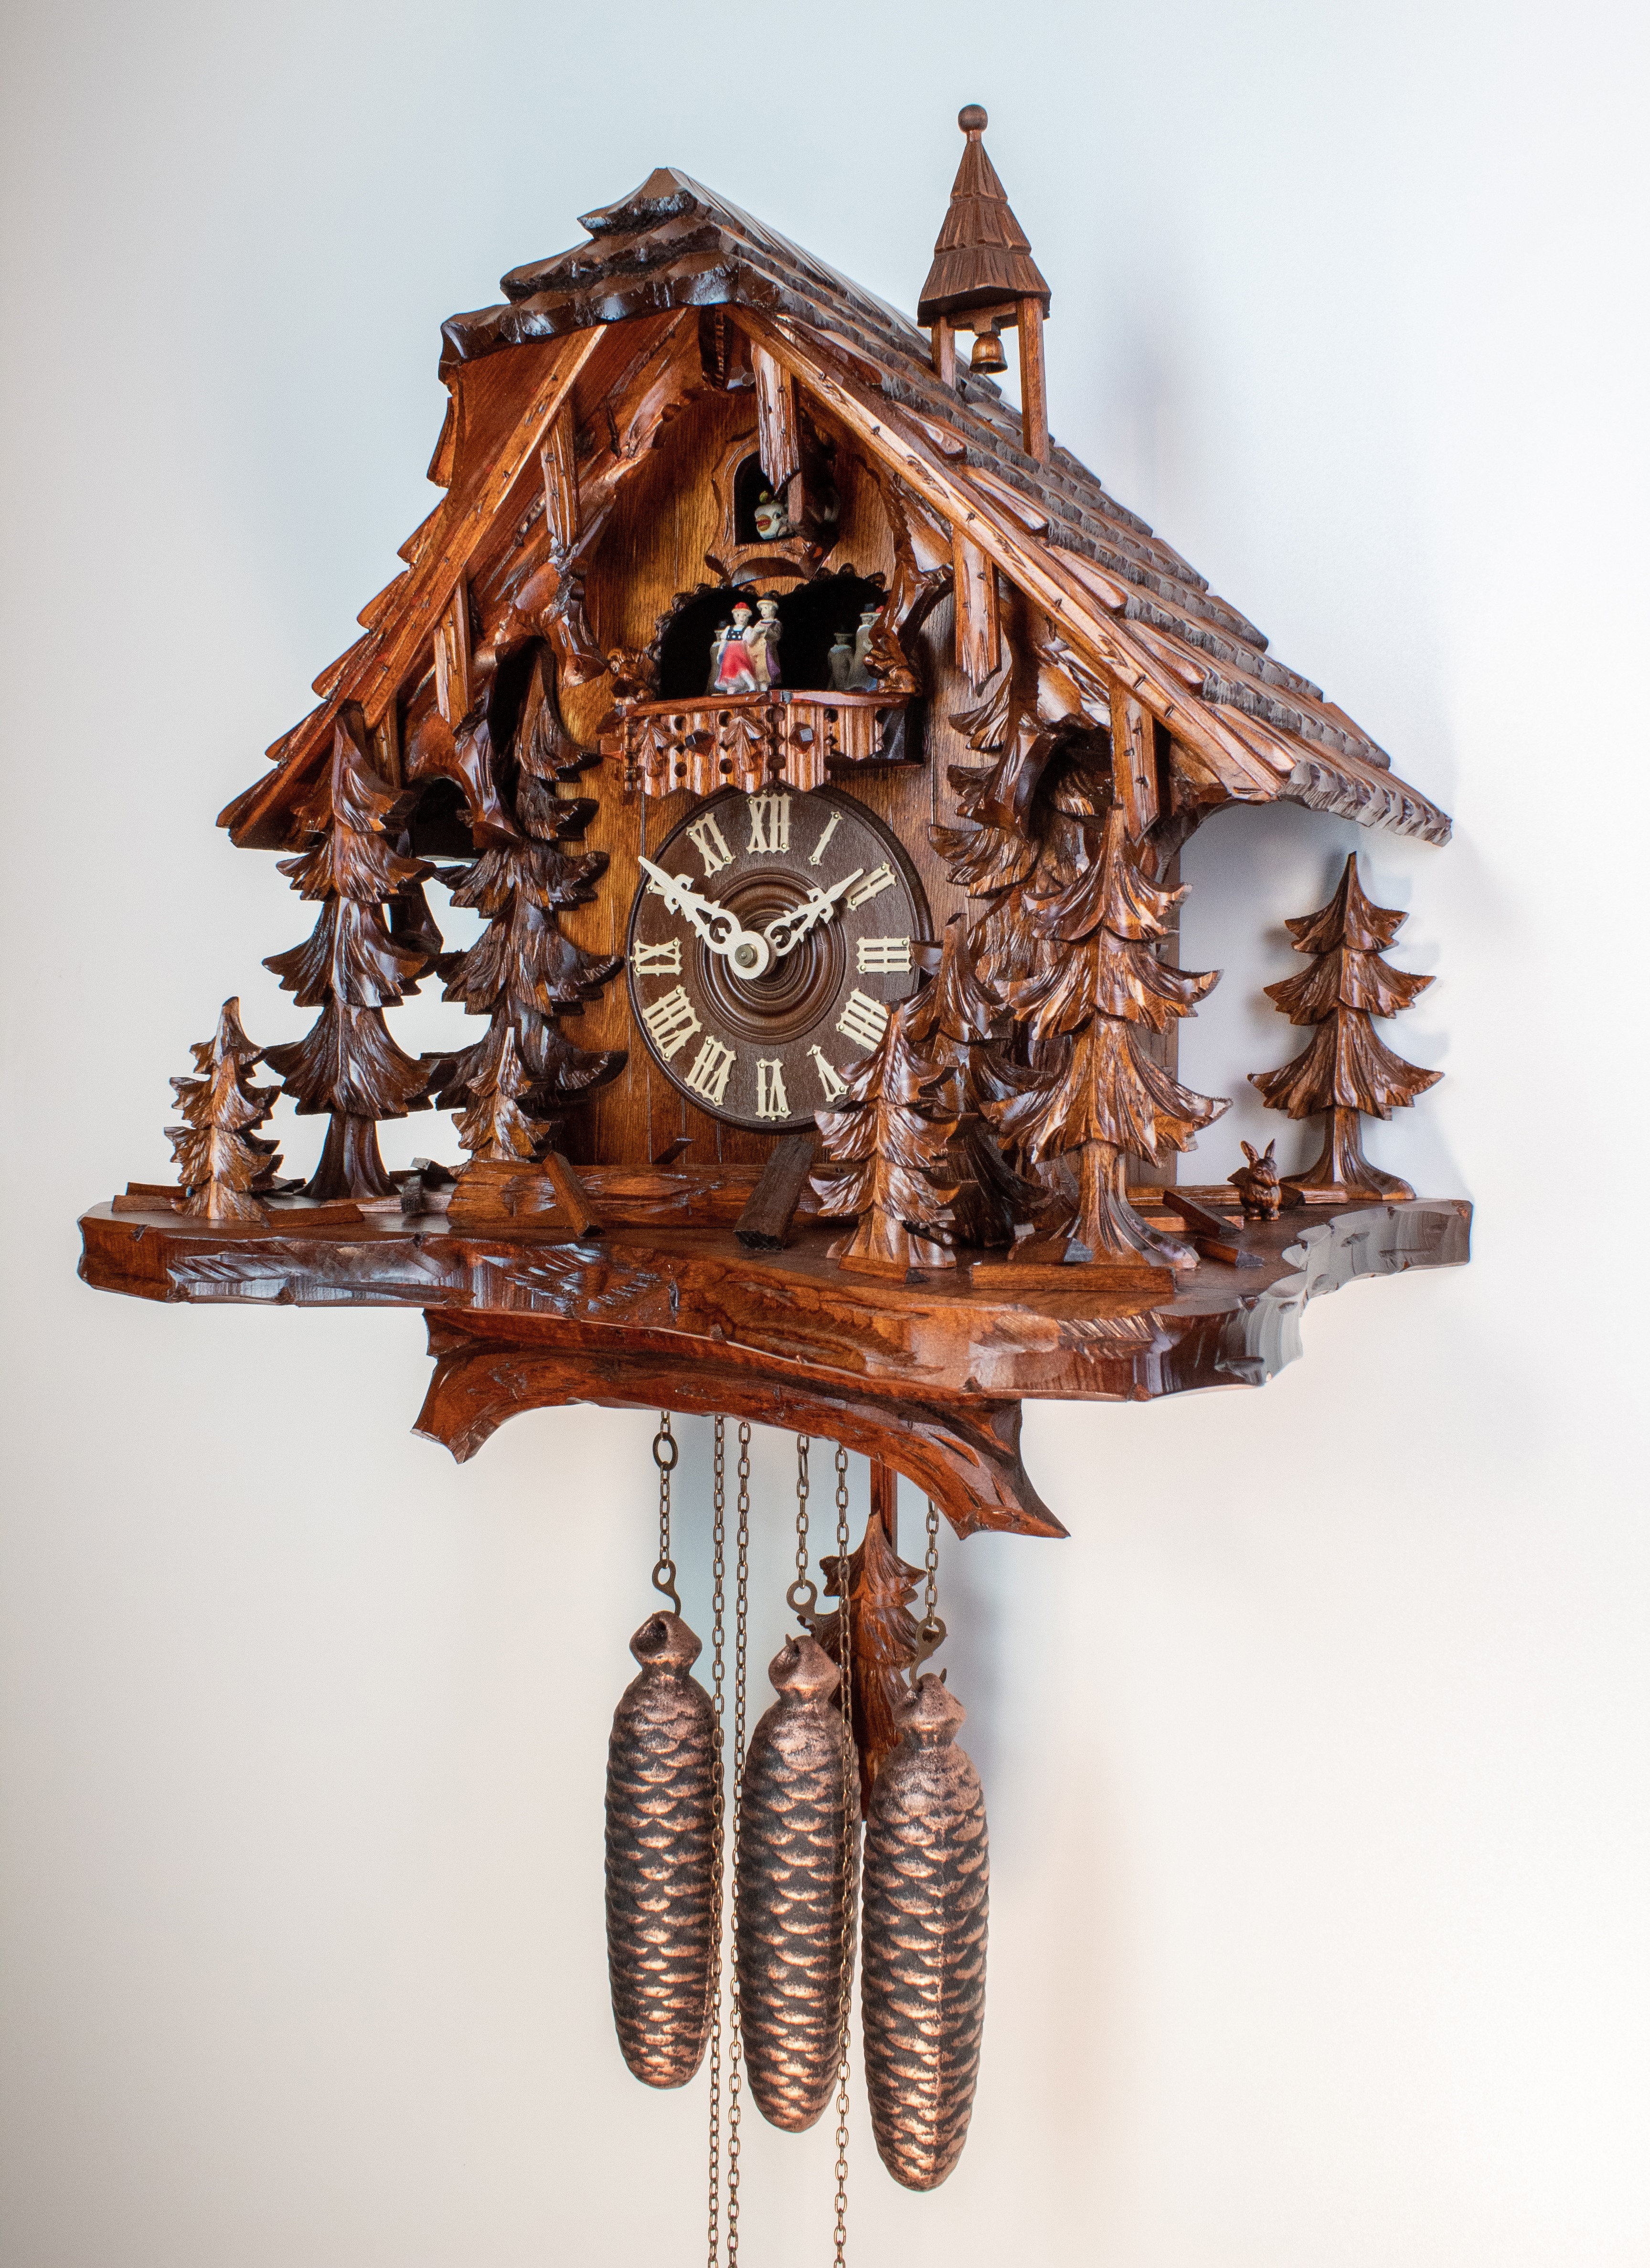 8 Days Music Dancer  Cuckoo Clock Black Forest House with squirrel 